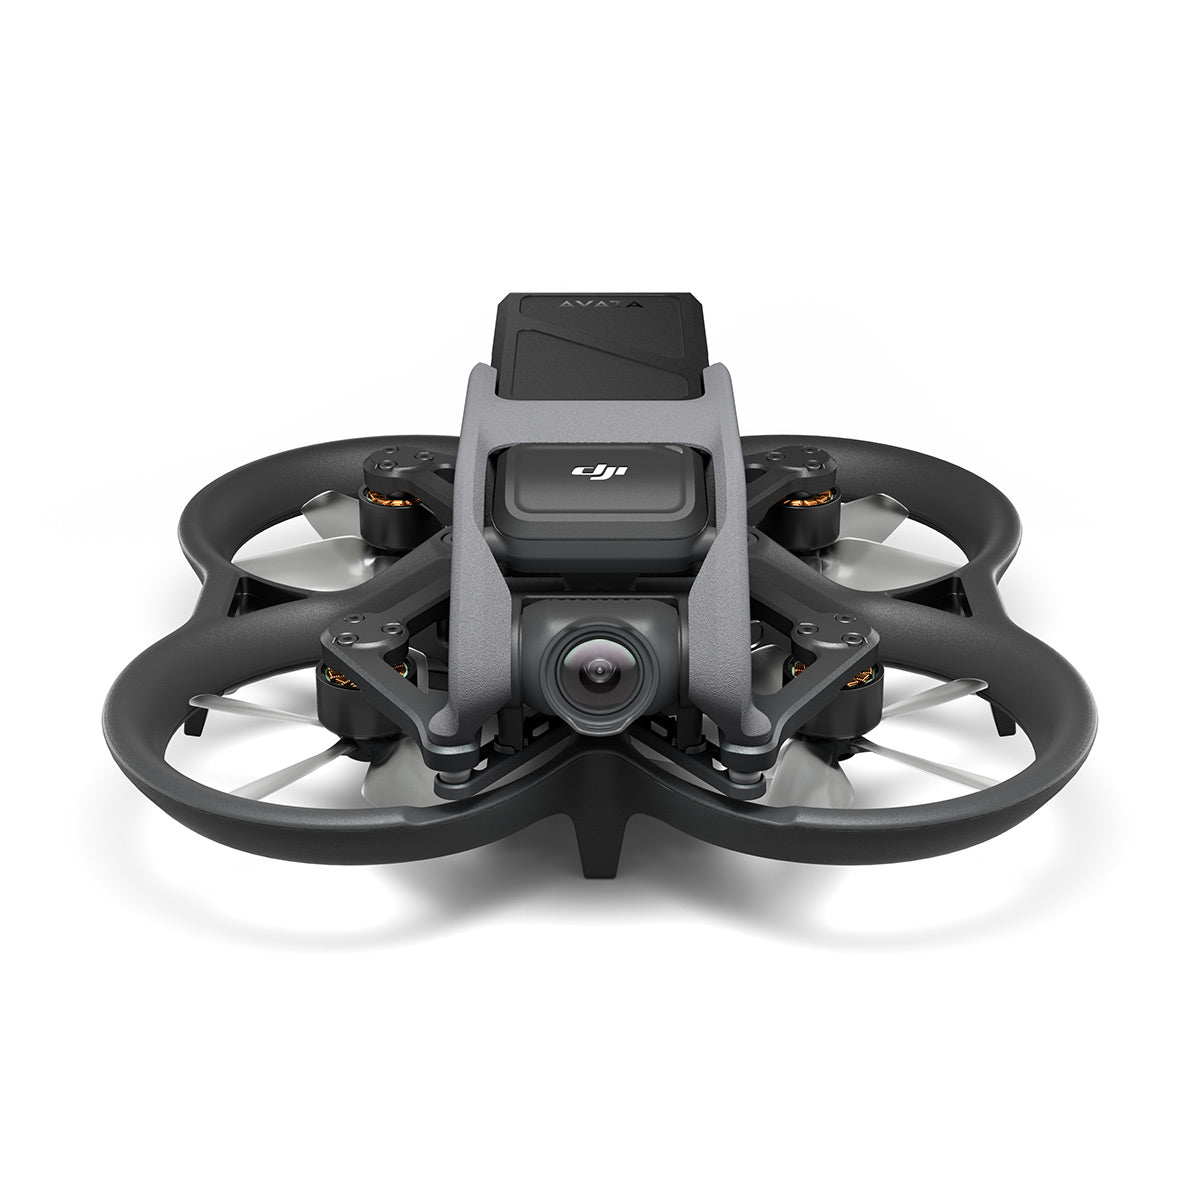 DJI Avata Pro View Combo with Motion Controller